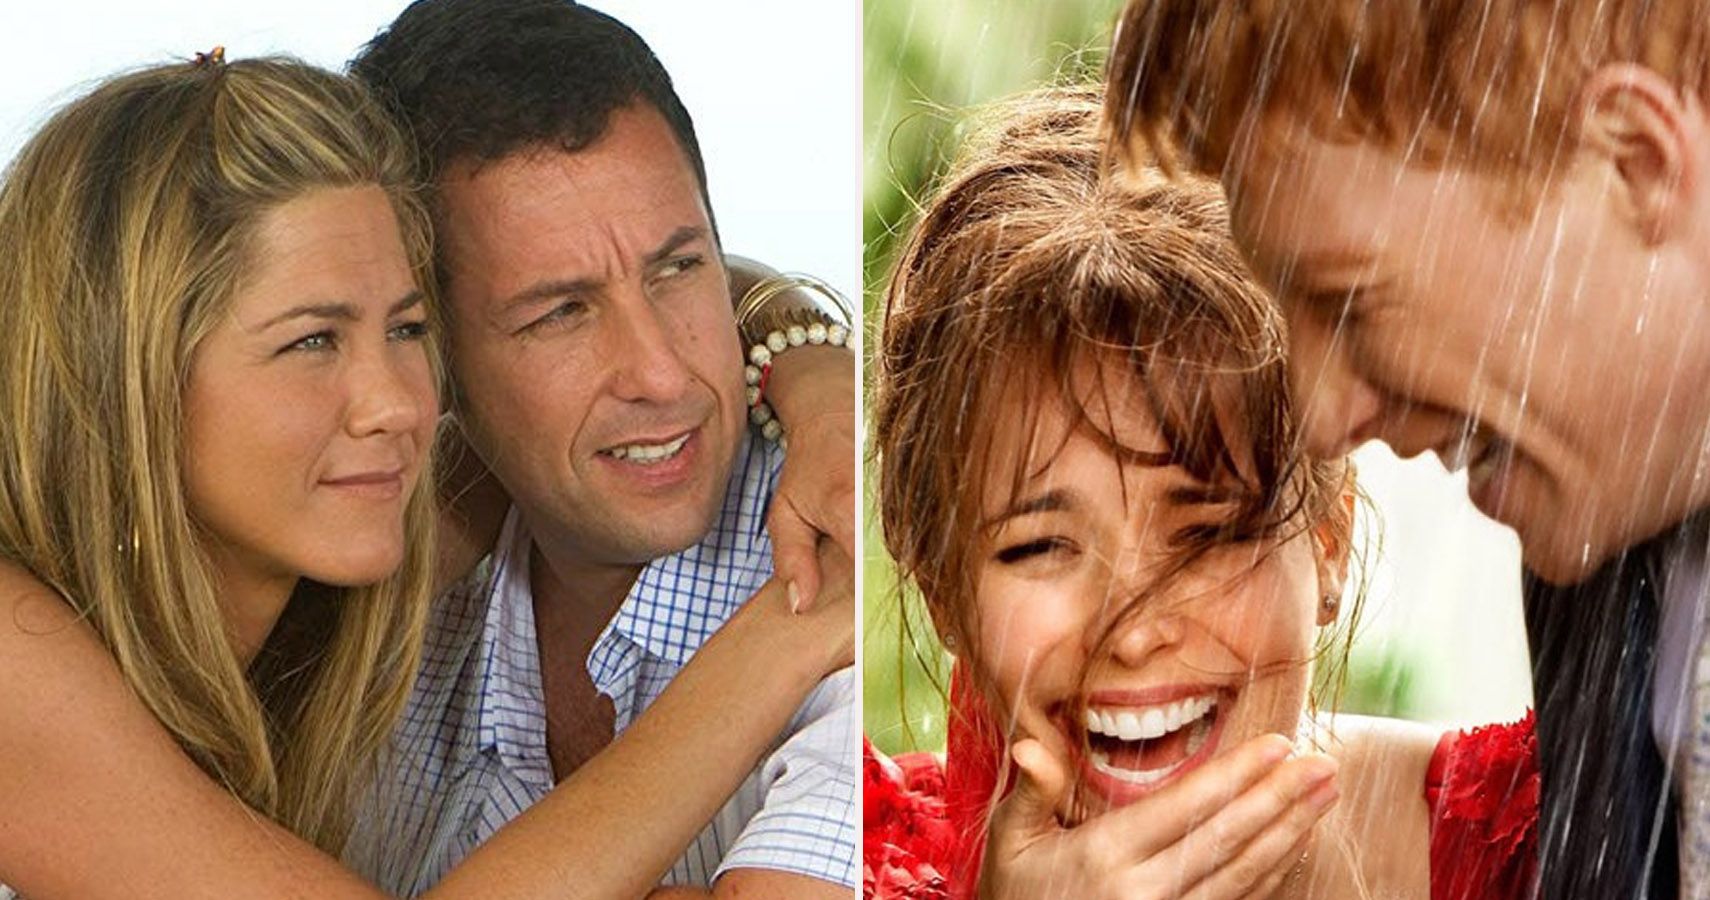 The 10 Worst Rom-Com Couples From The Past Decade We Wish Would Break Up